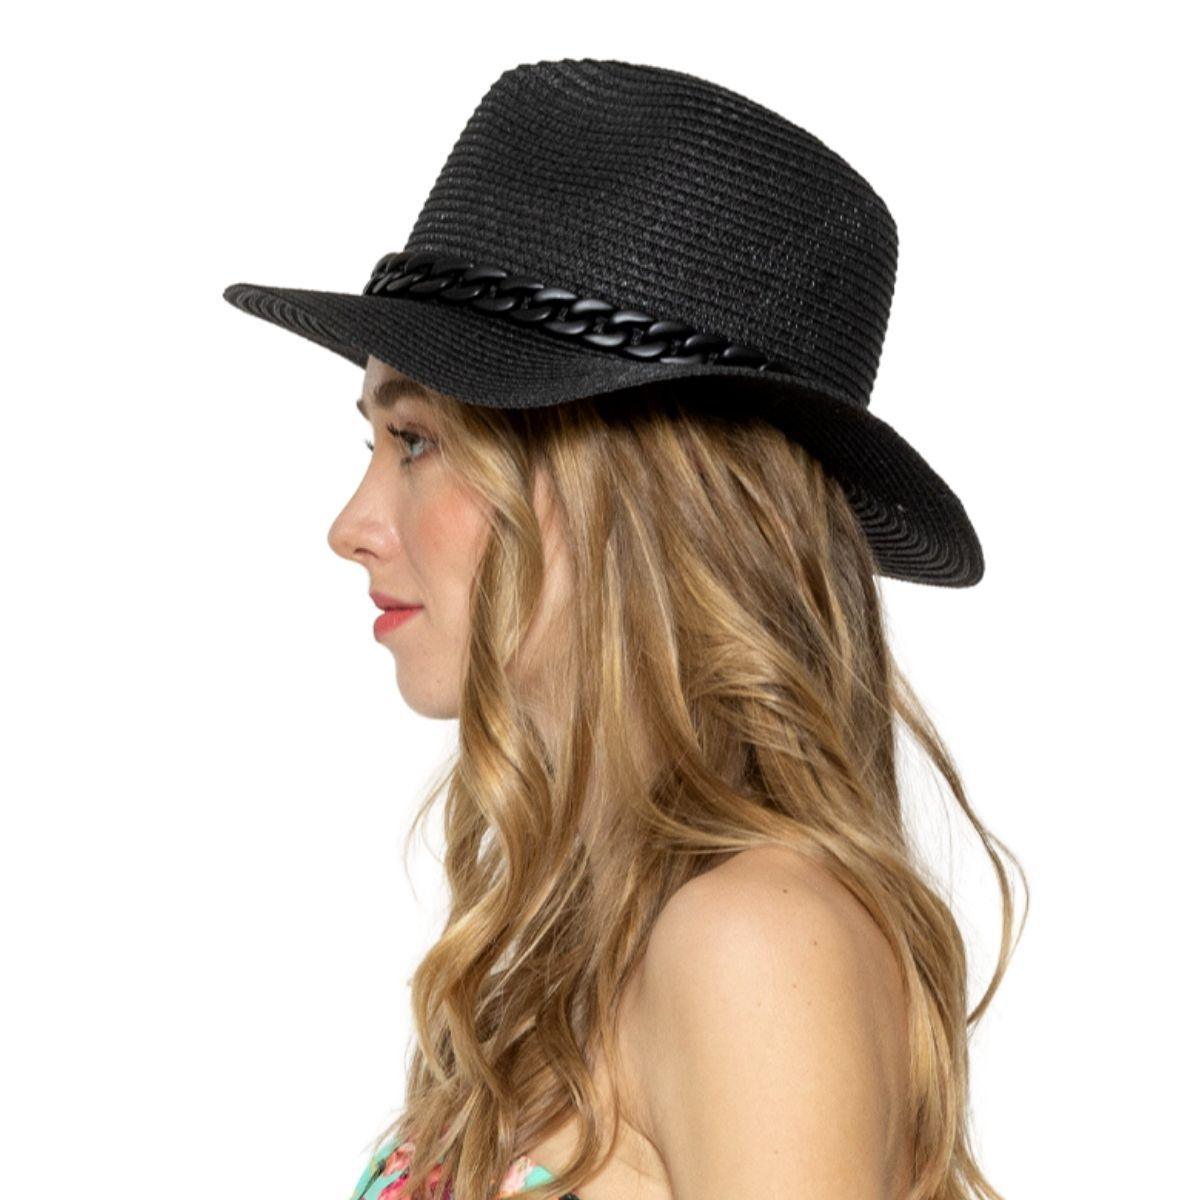 Panama Hat in Black with Chain Band Detail for Women